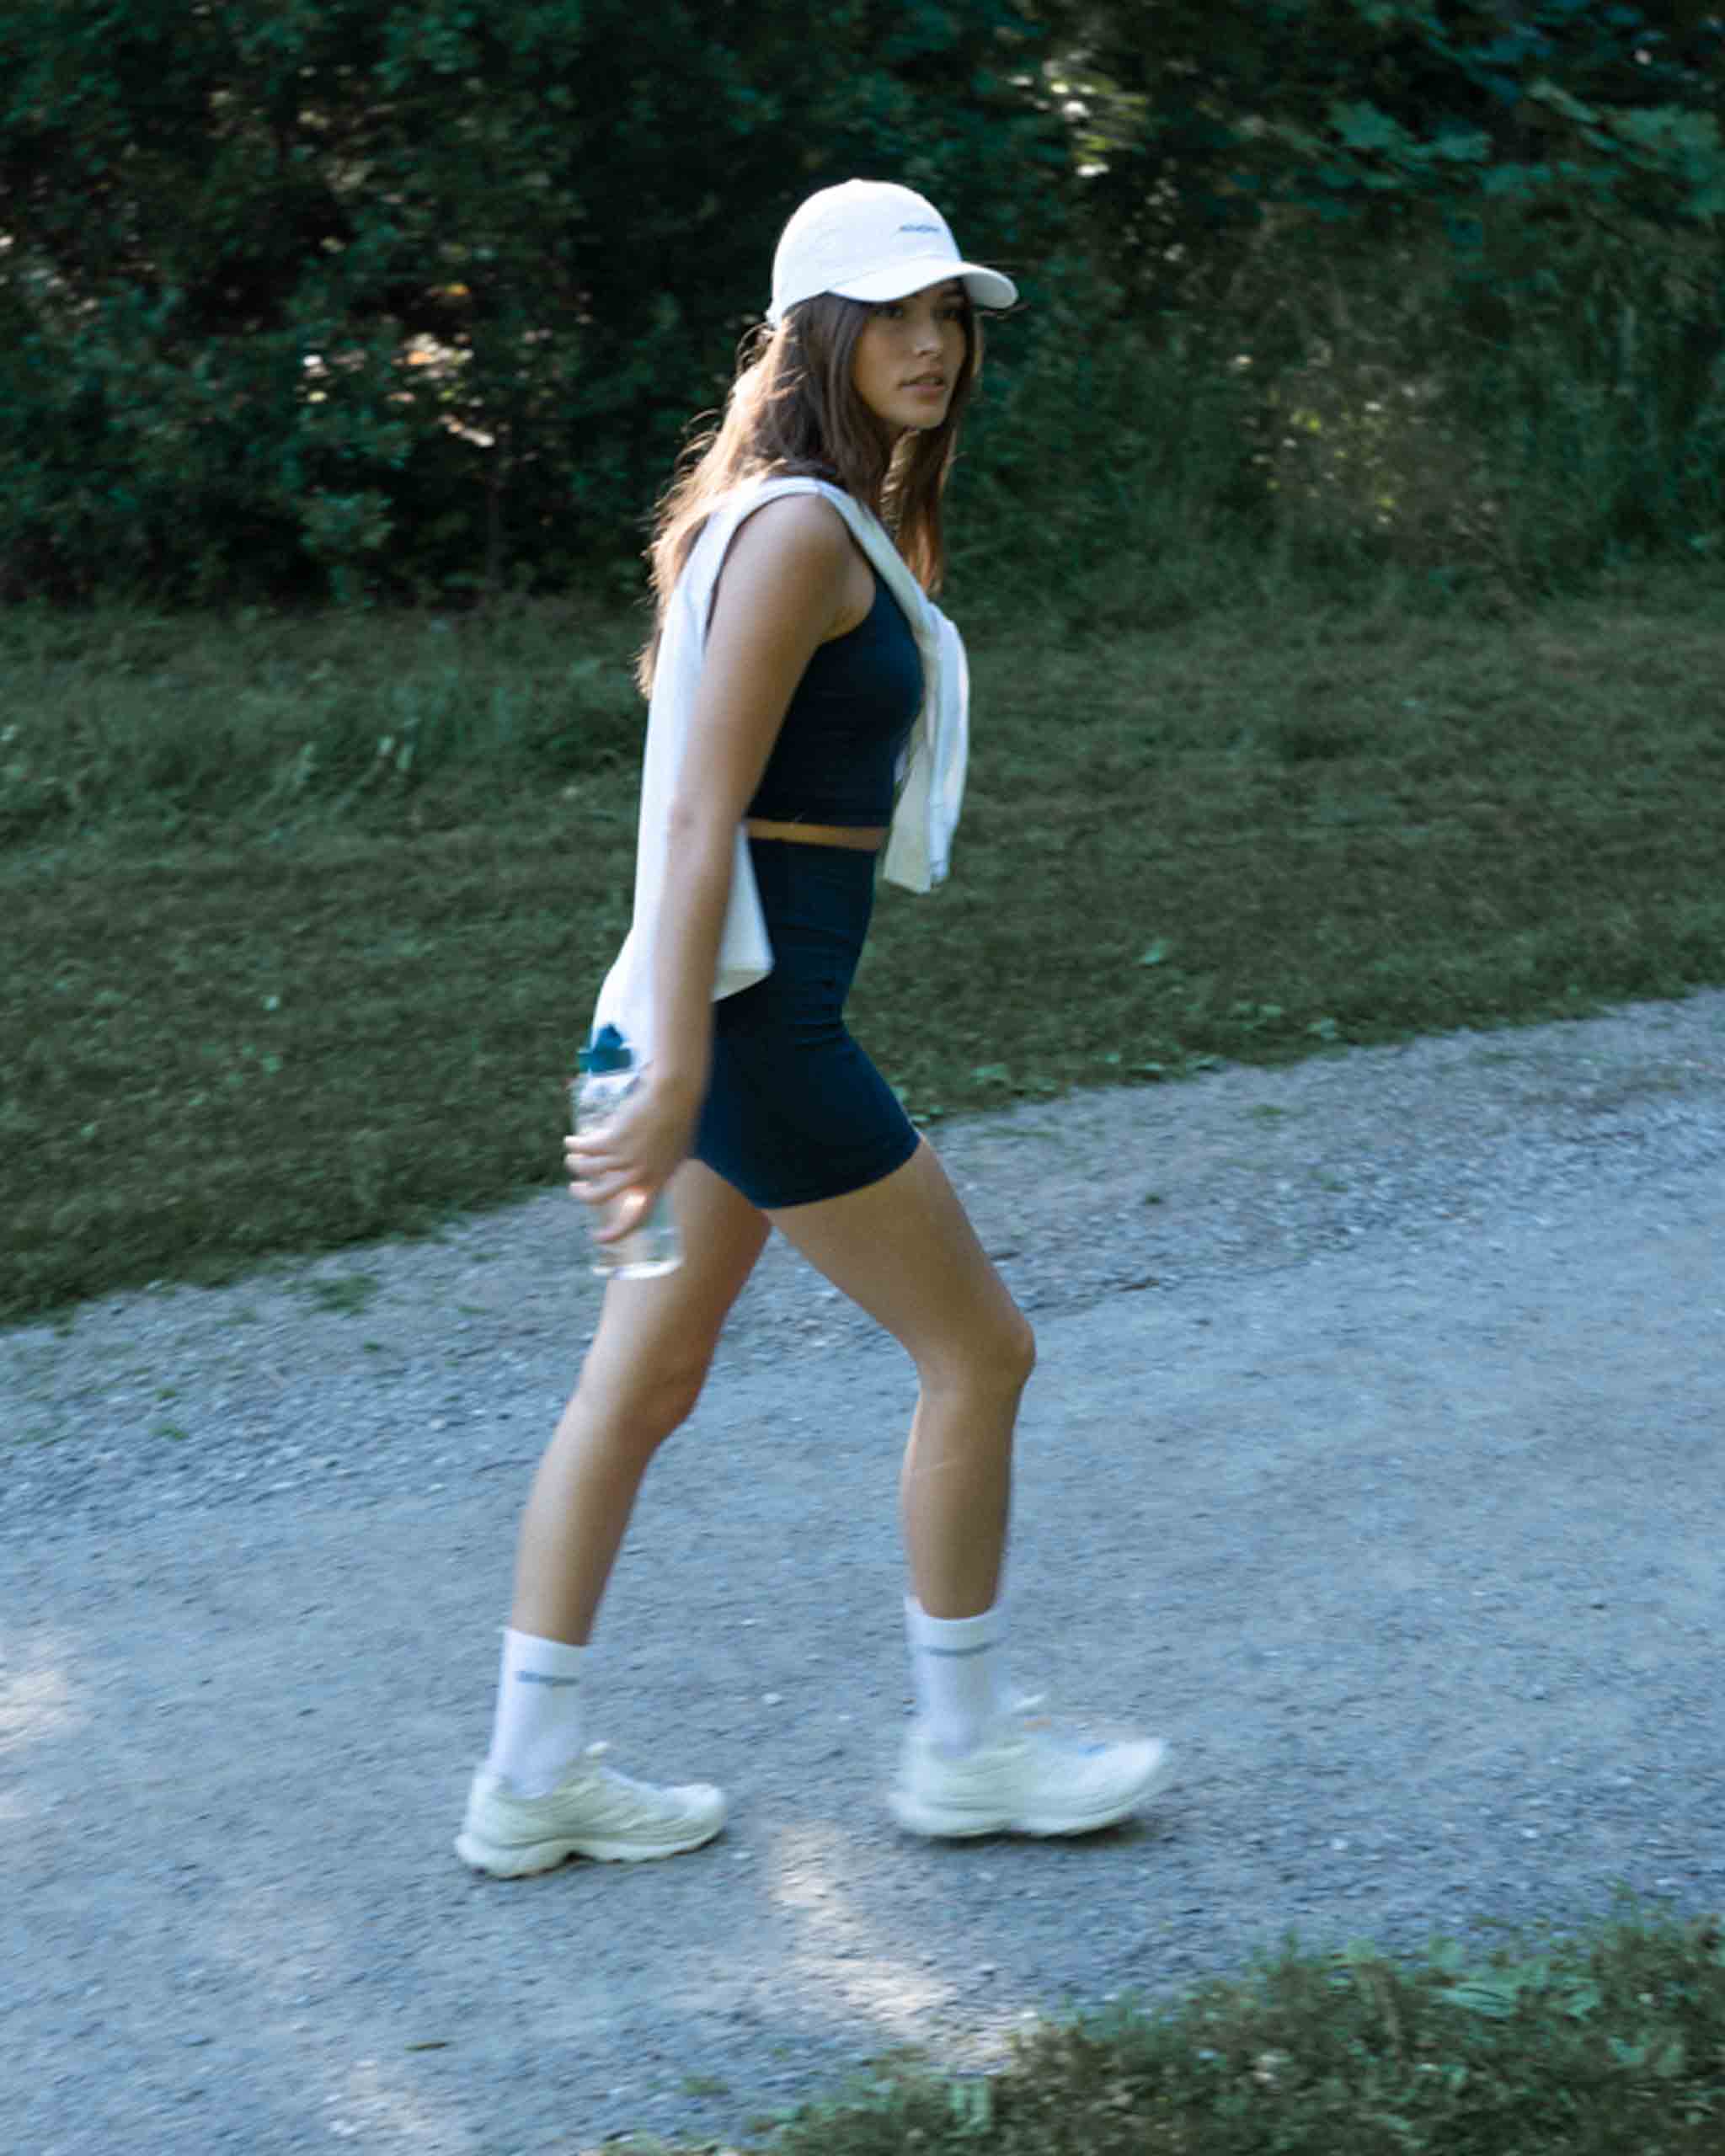 Girl in ninepine activewear outfit walking on a gravel track